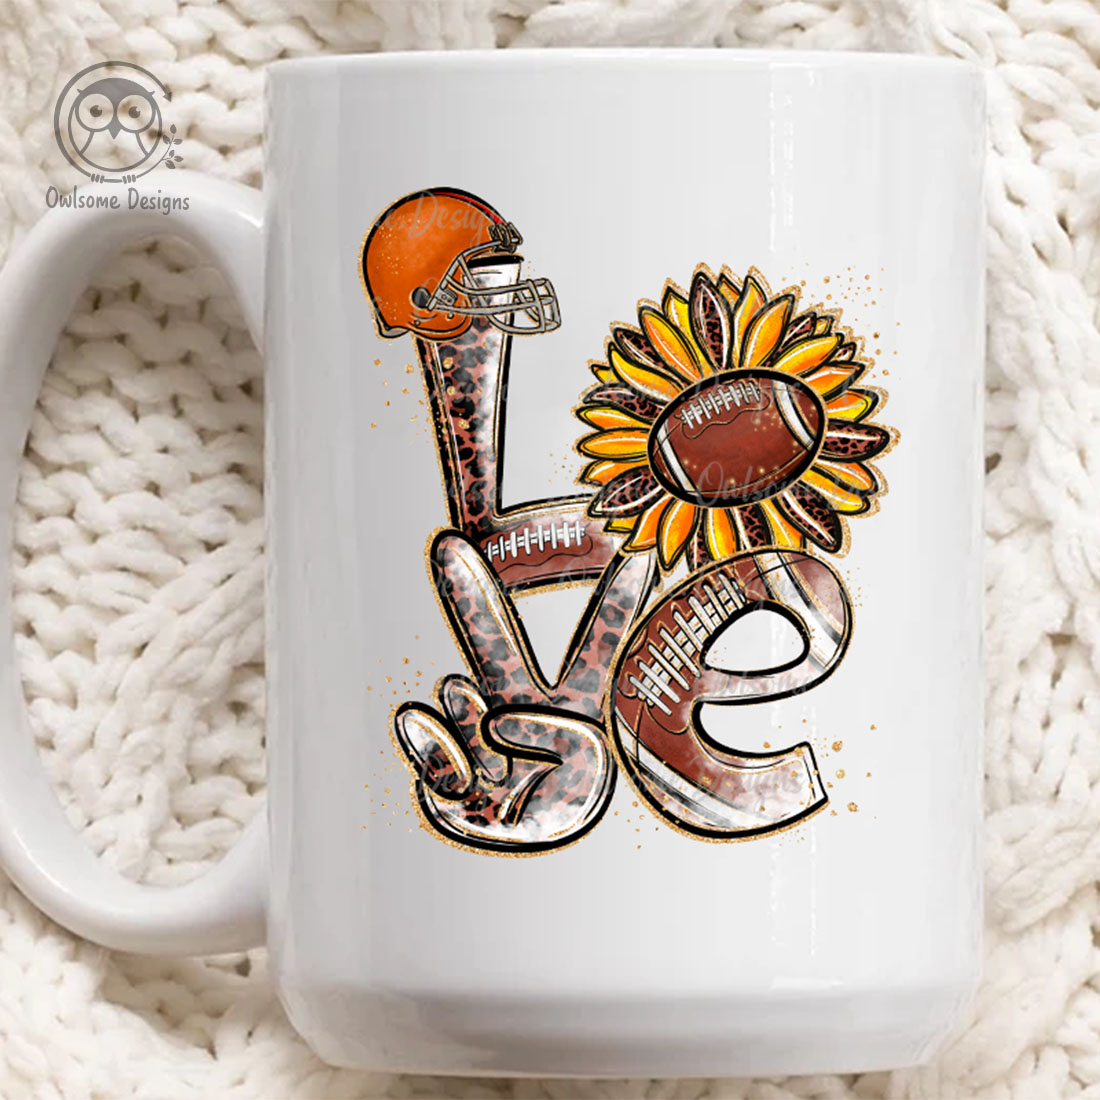 Image of a white cup with a colorful inscription Love with elements of football.